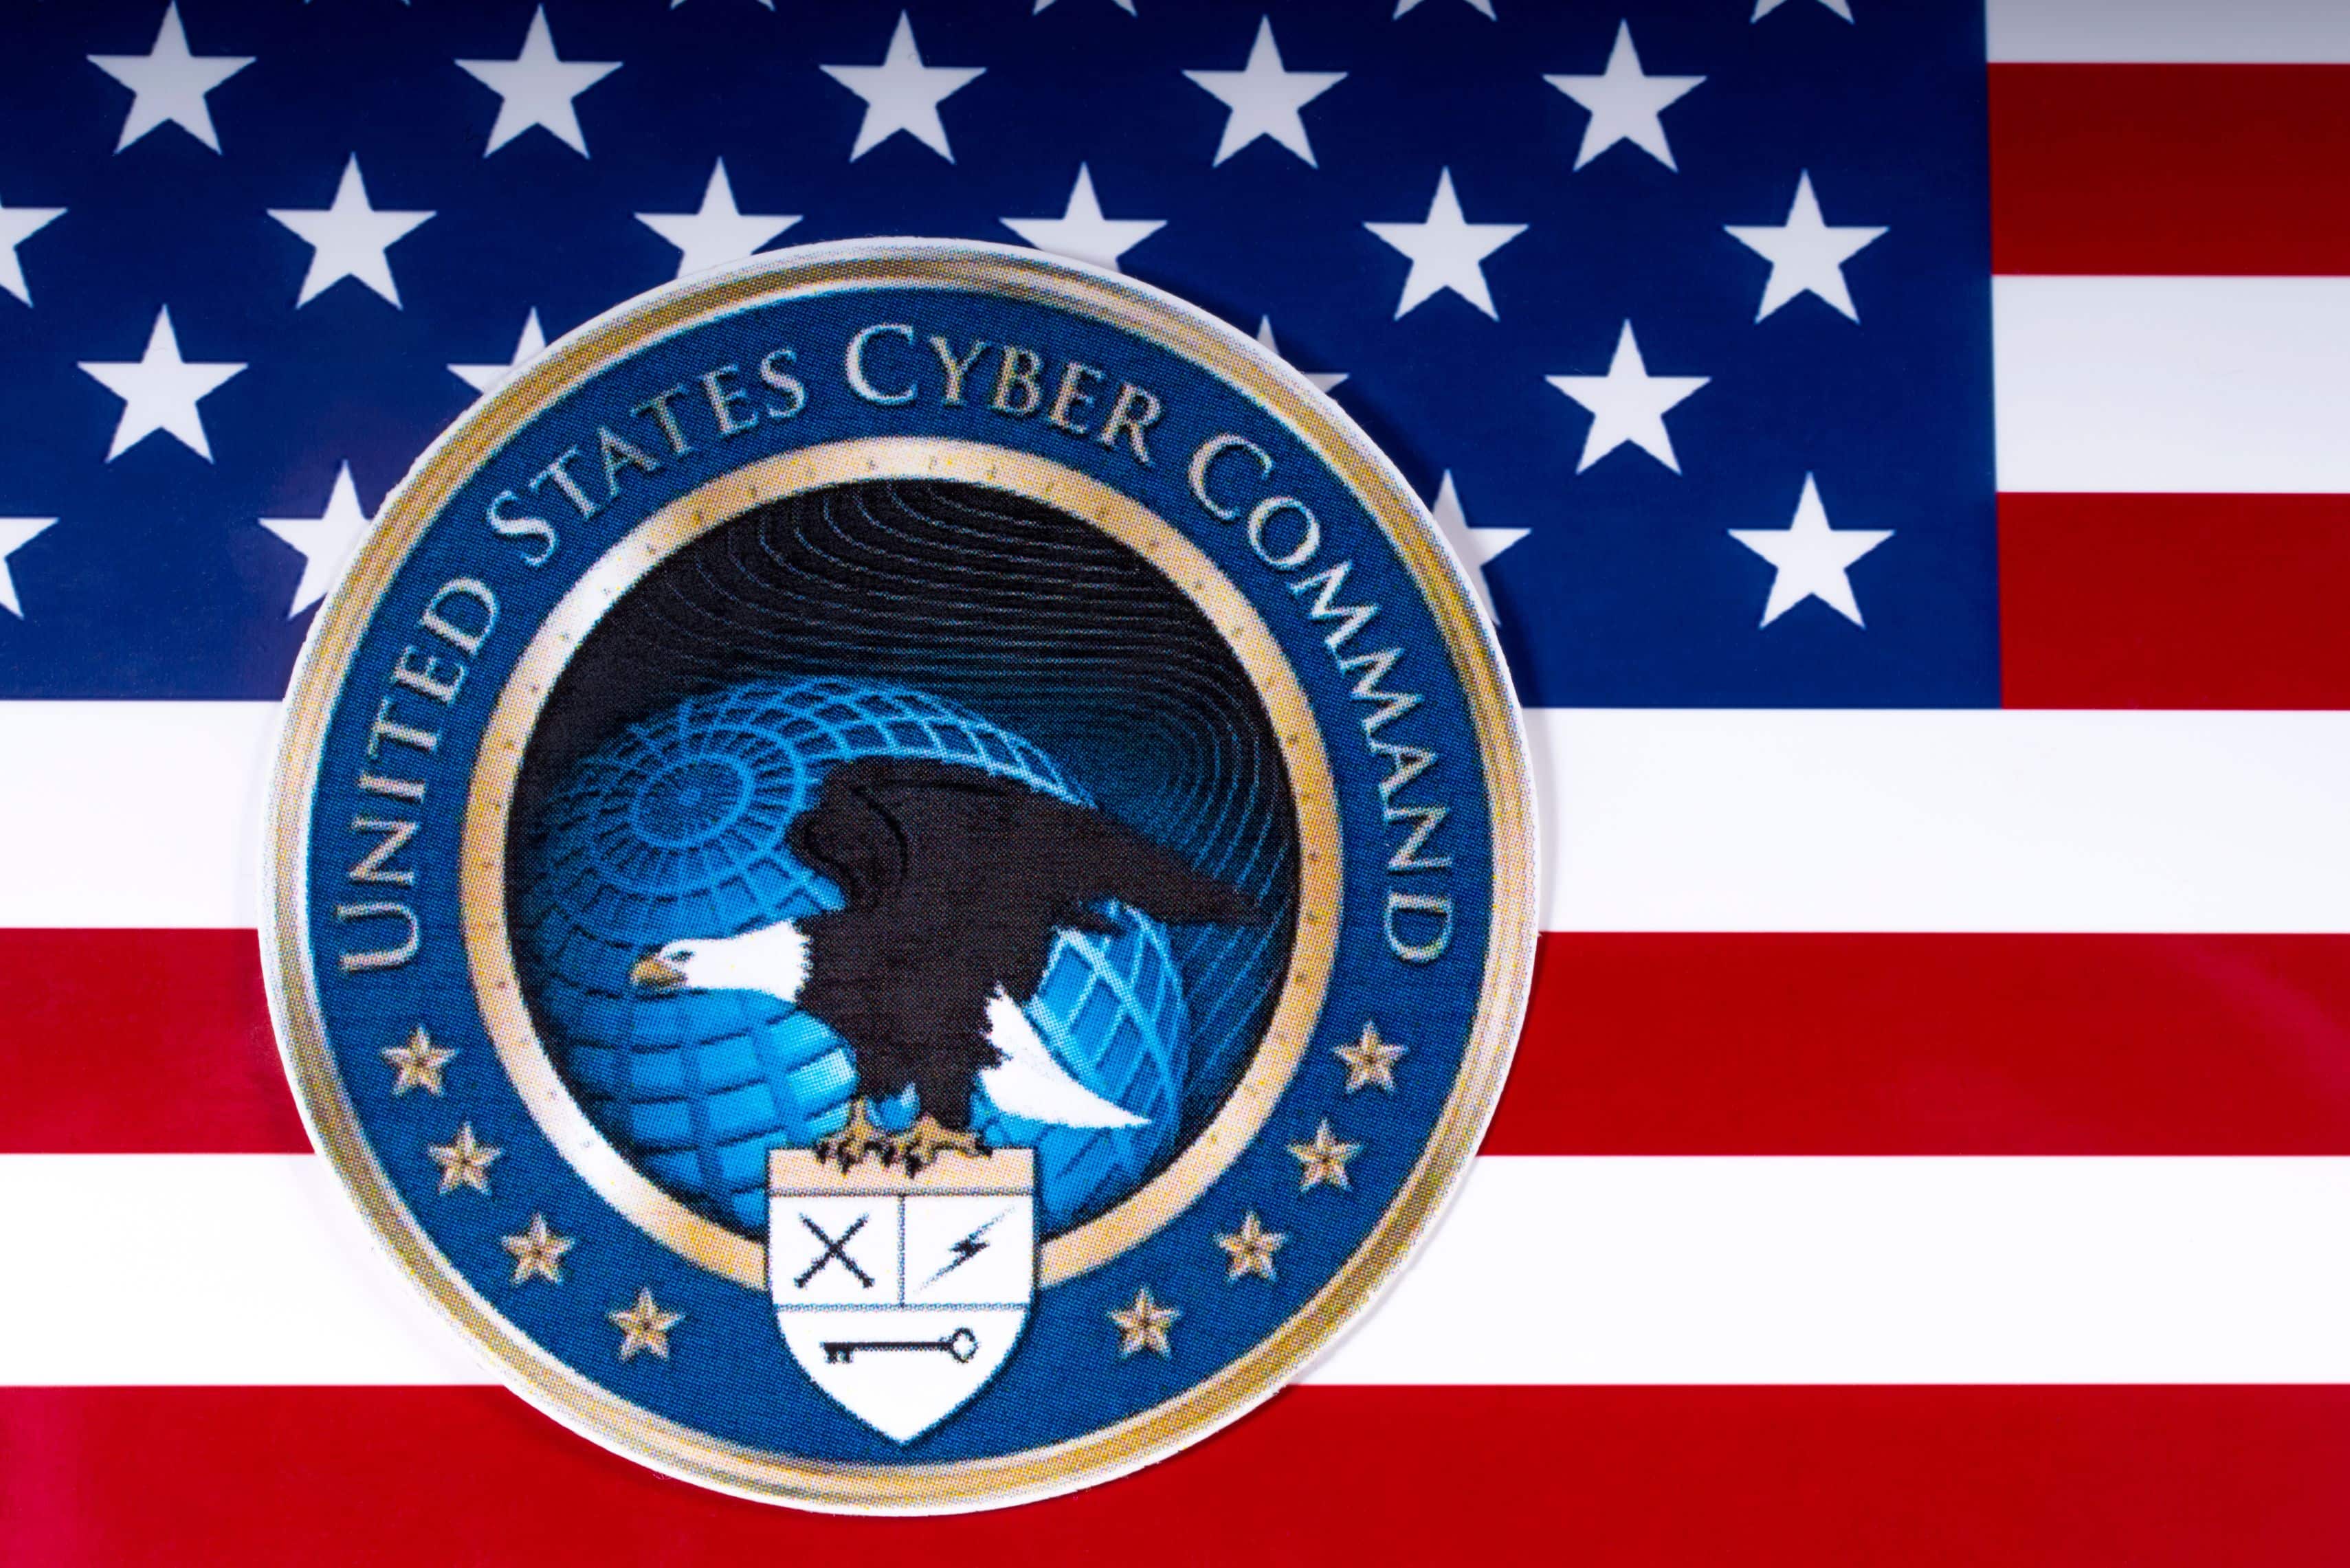 LONDON, UK - MARCH 26TH 2018: The symbol of the United States Cyber Command portrayed with the US flag, on 26th March 2018.